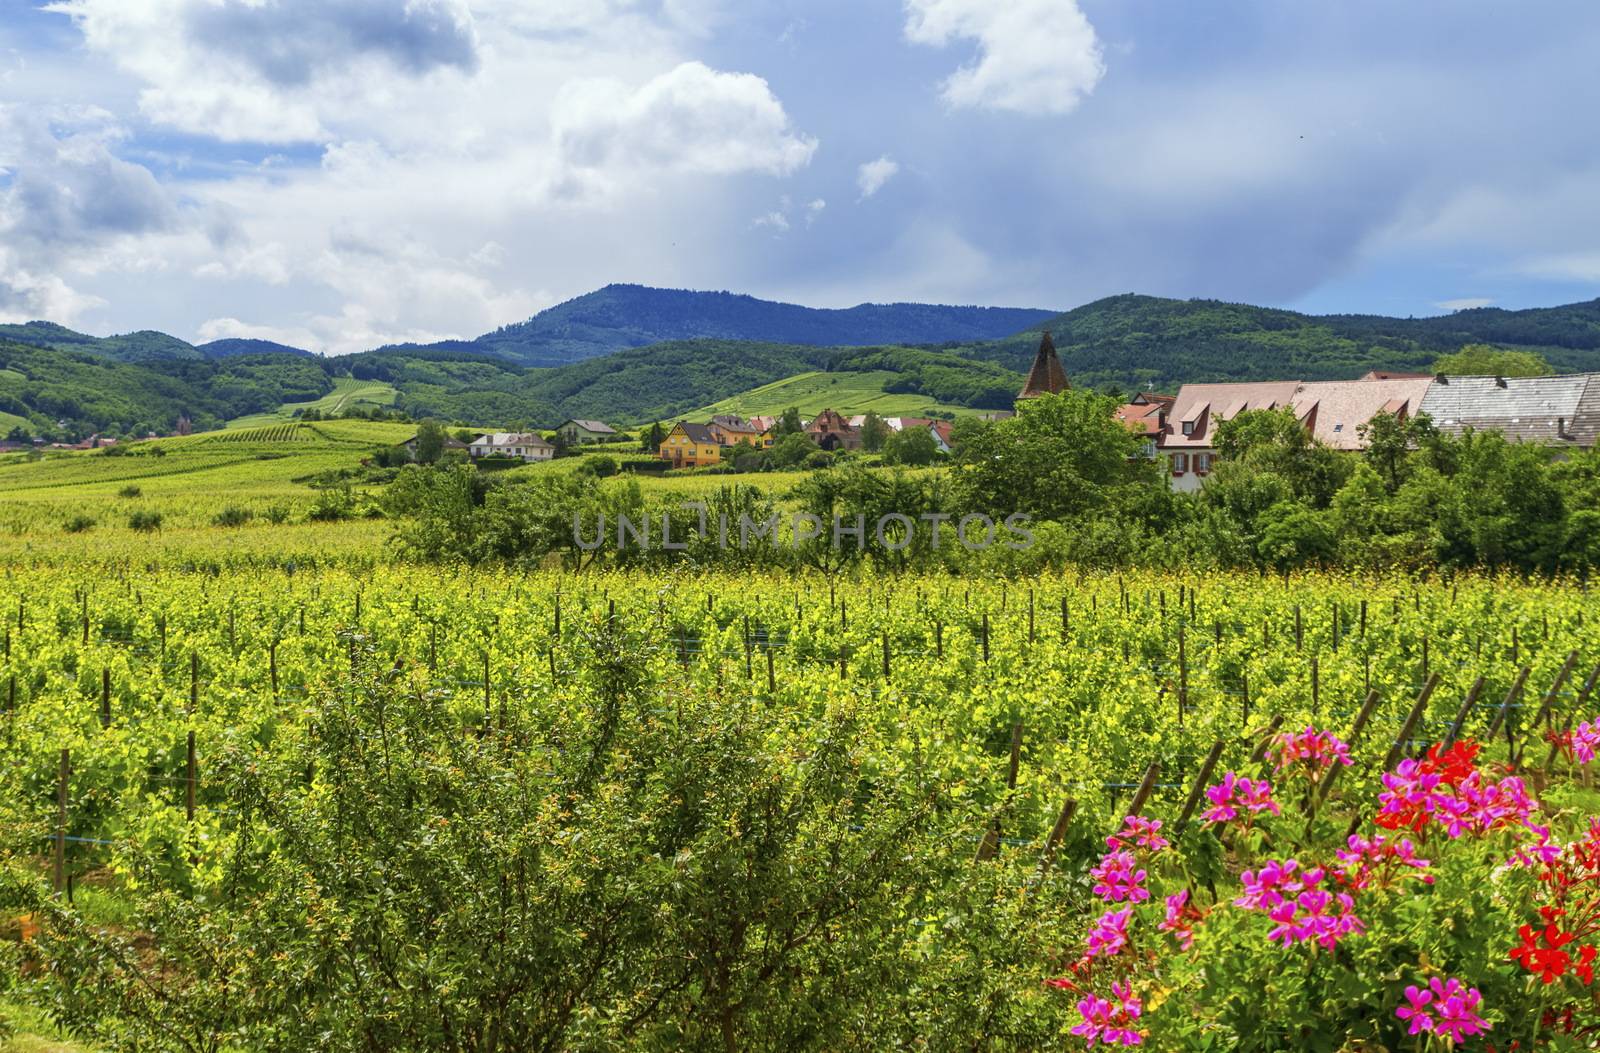 Alsace landscape with village and vineyards by cloudy day, France